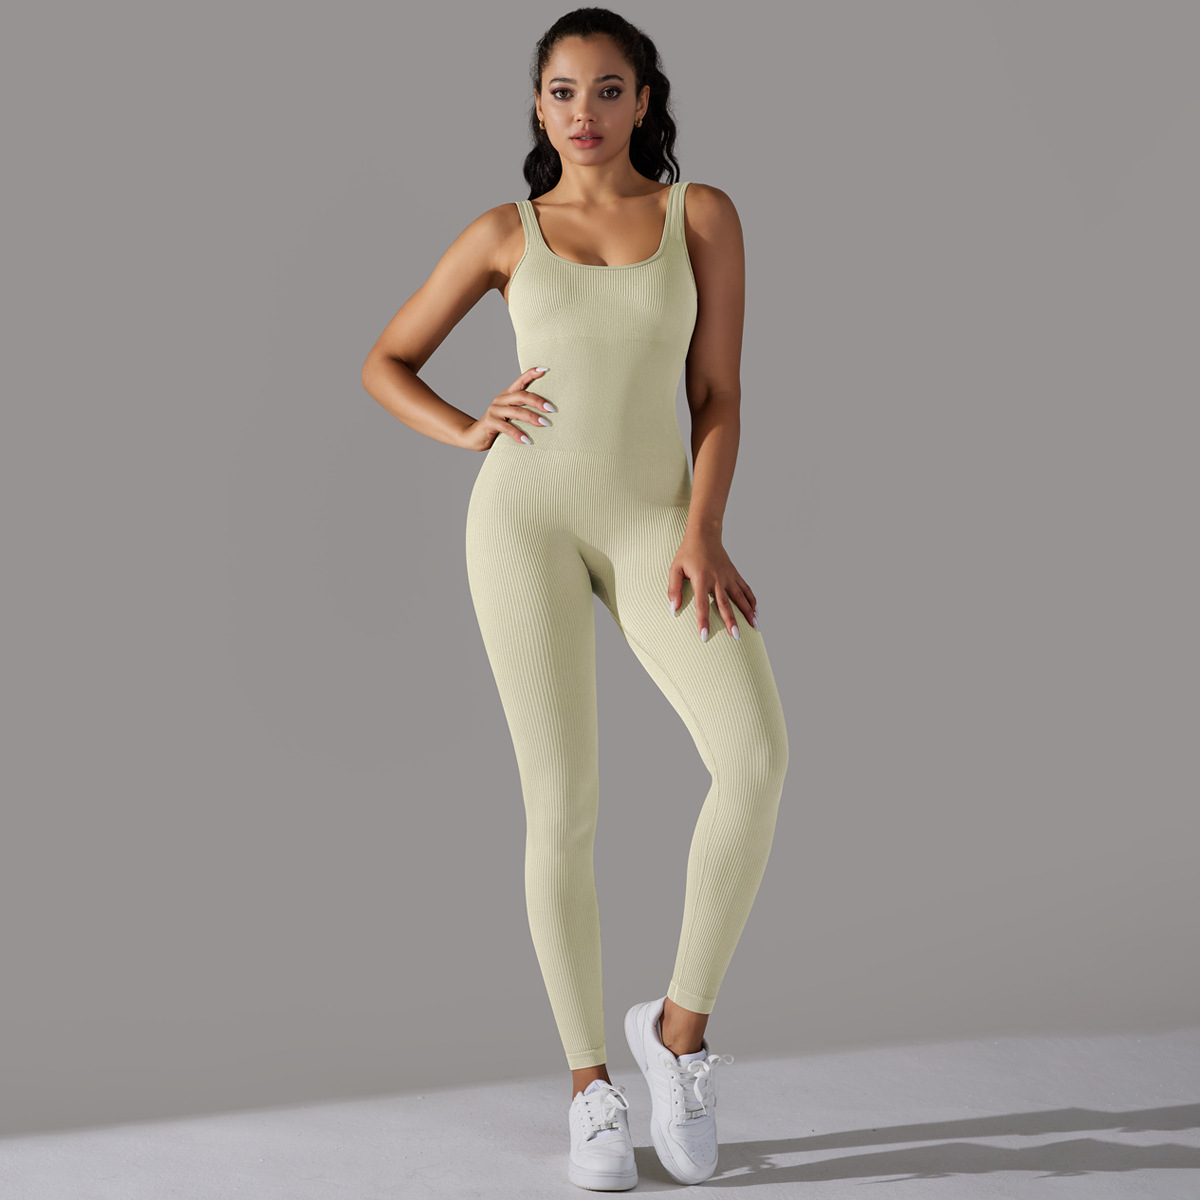 gym clothing manufacturers